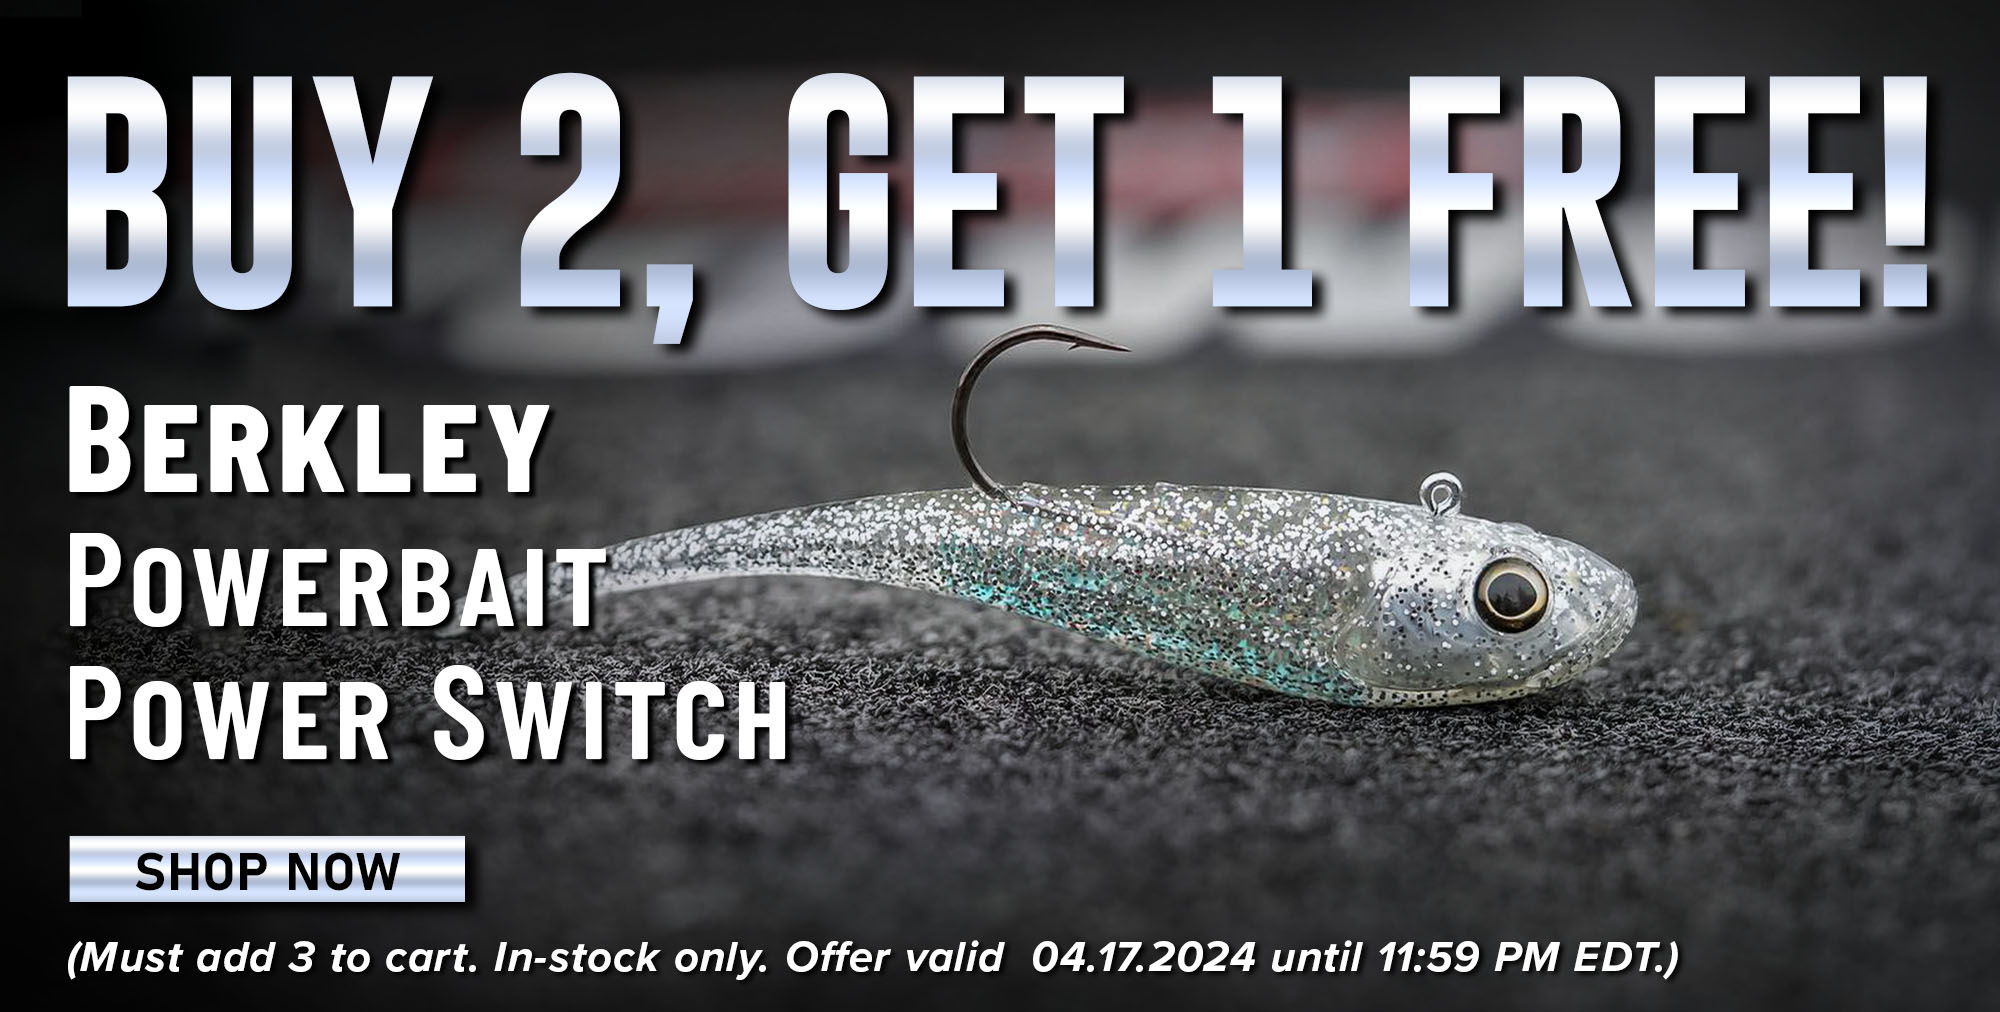 Buy 2, Get 1 Free! Berkley PowerBait Power Switch Shop Now (Must add 3 to cart. In-stock only. Offer valid 04.17.2024 until 11:59 PM EDT.)